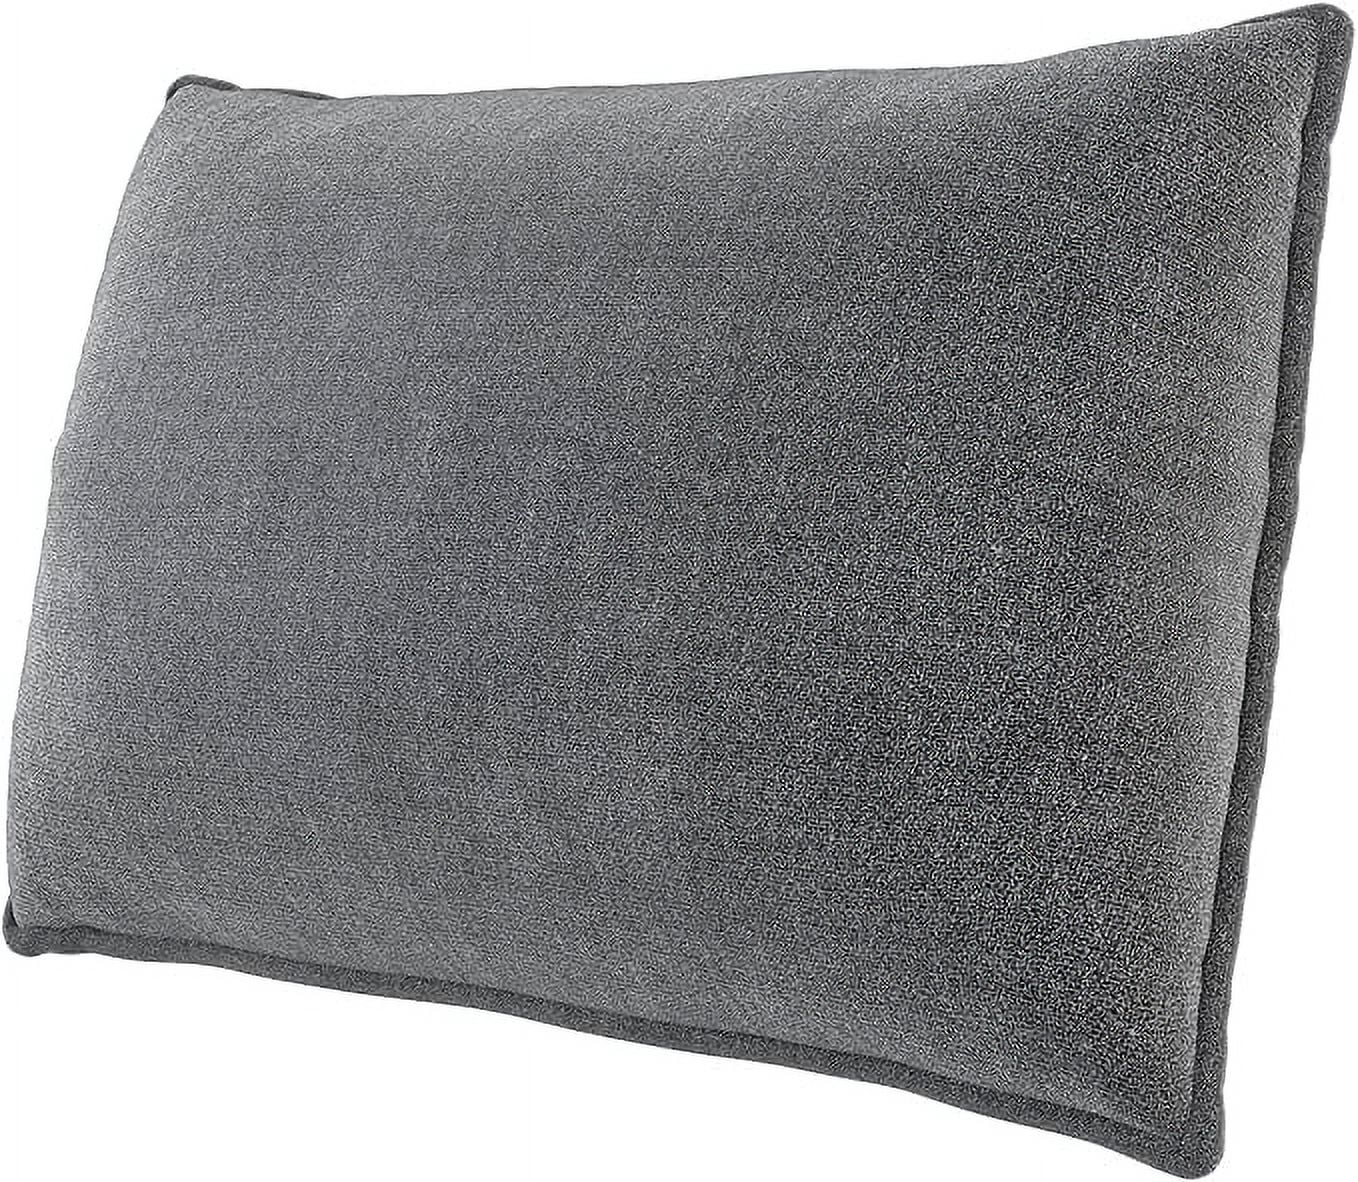 HONBAY Comfy Back Cushion Pillow with Removable Cover for Modular Sofa